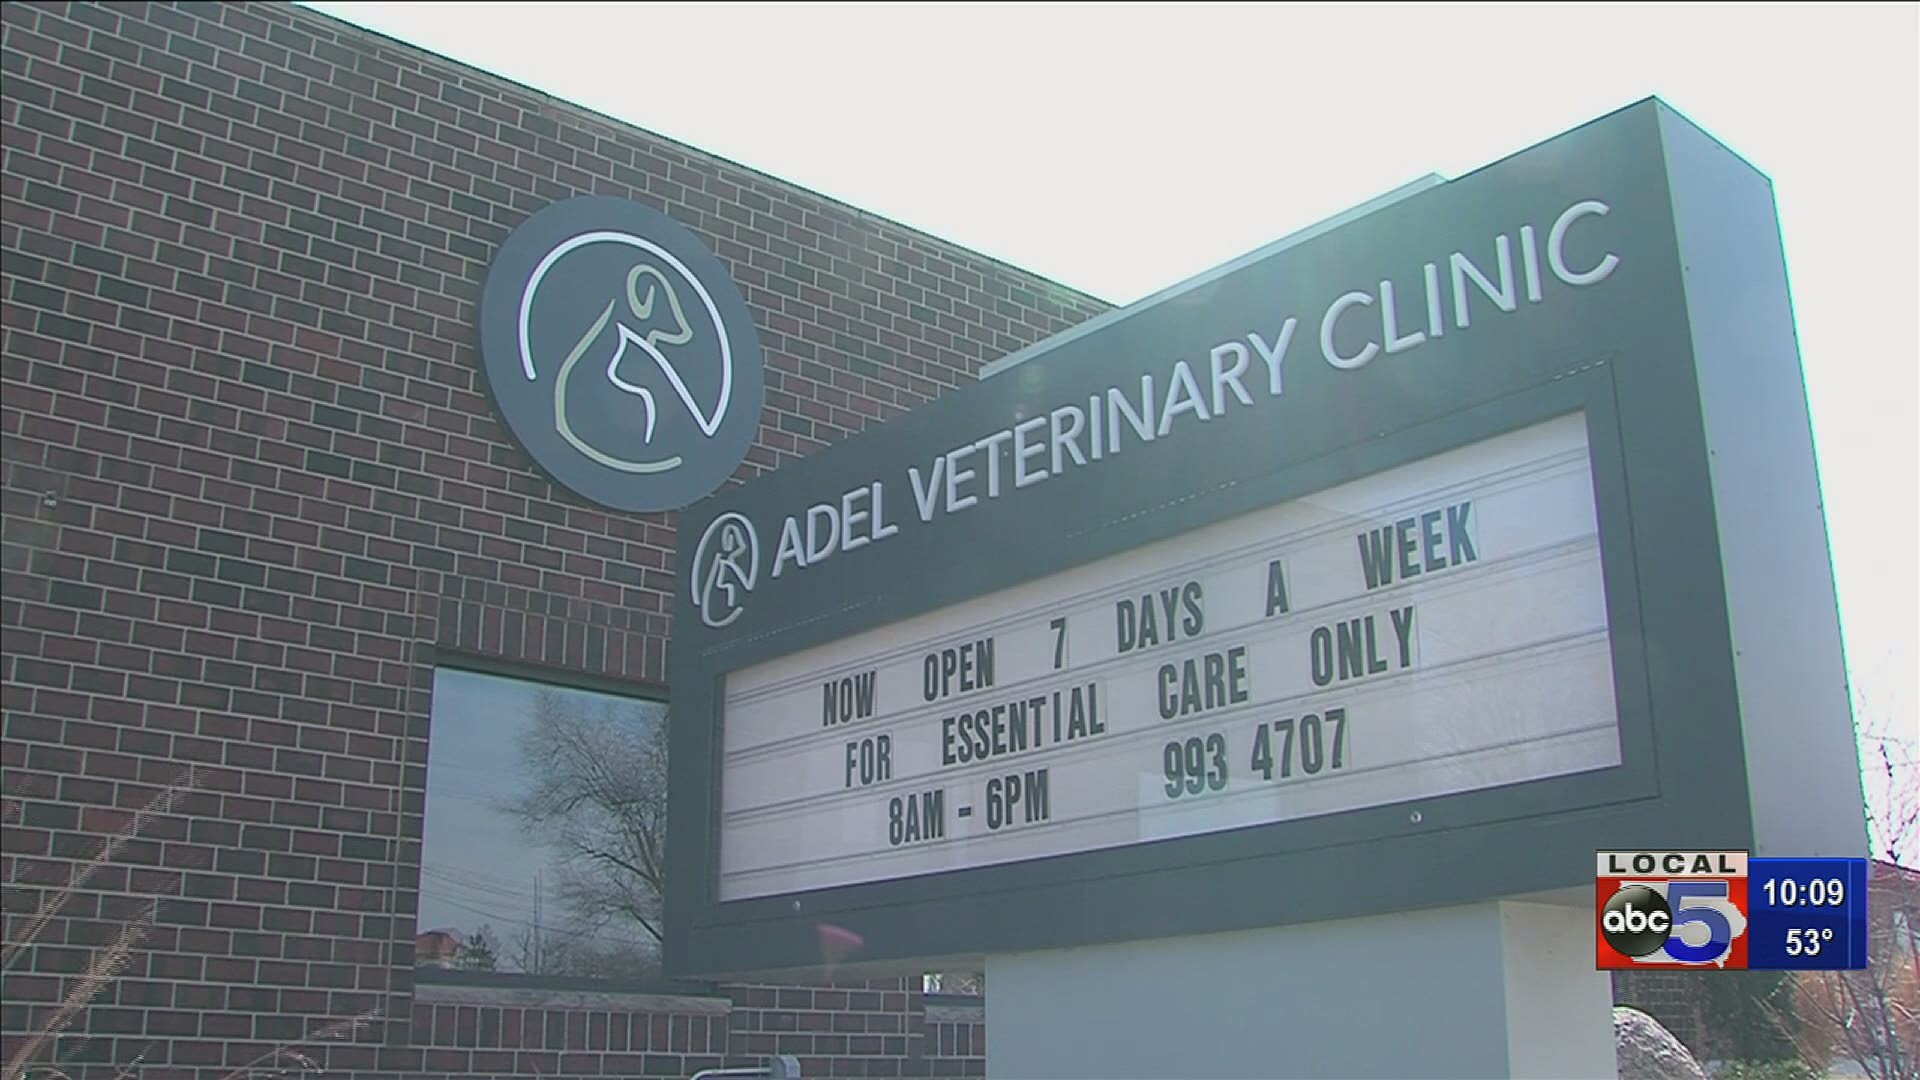 Pets are part of the family - and in this time of social distancing, we need them now more than ever. One vet clinic in Adel is expanding to fit their needs.